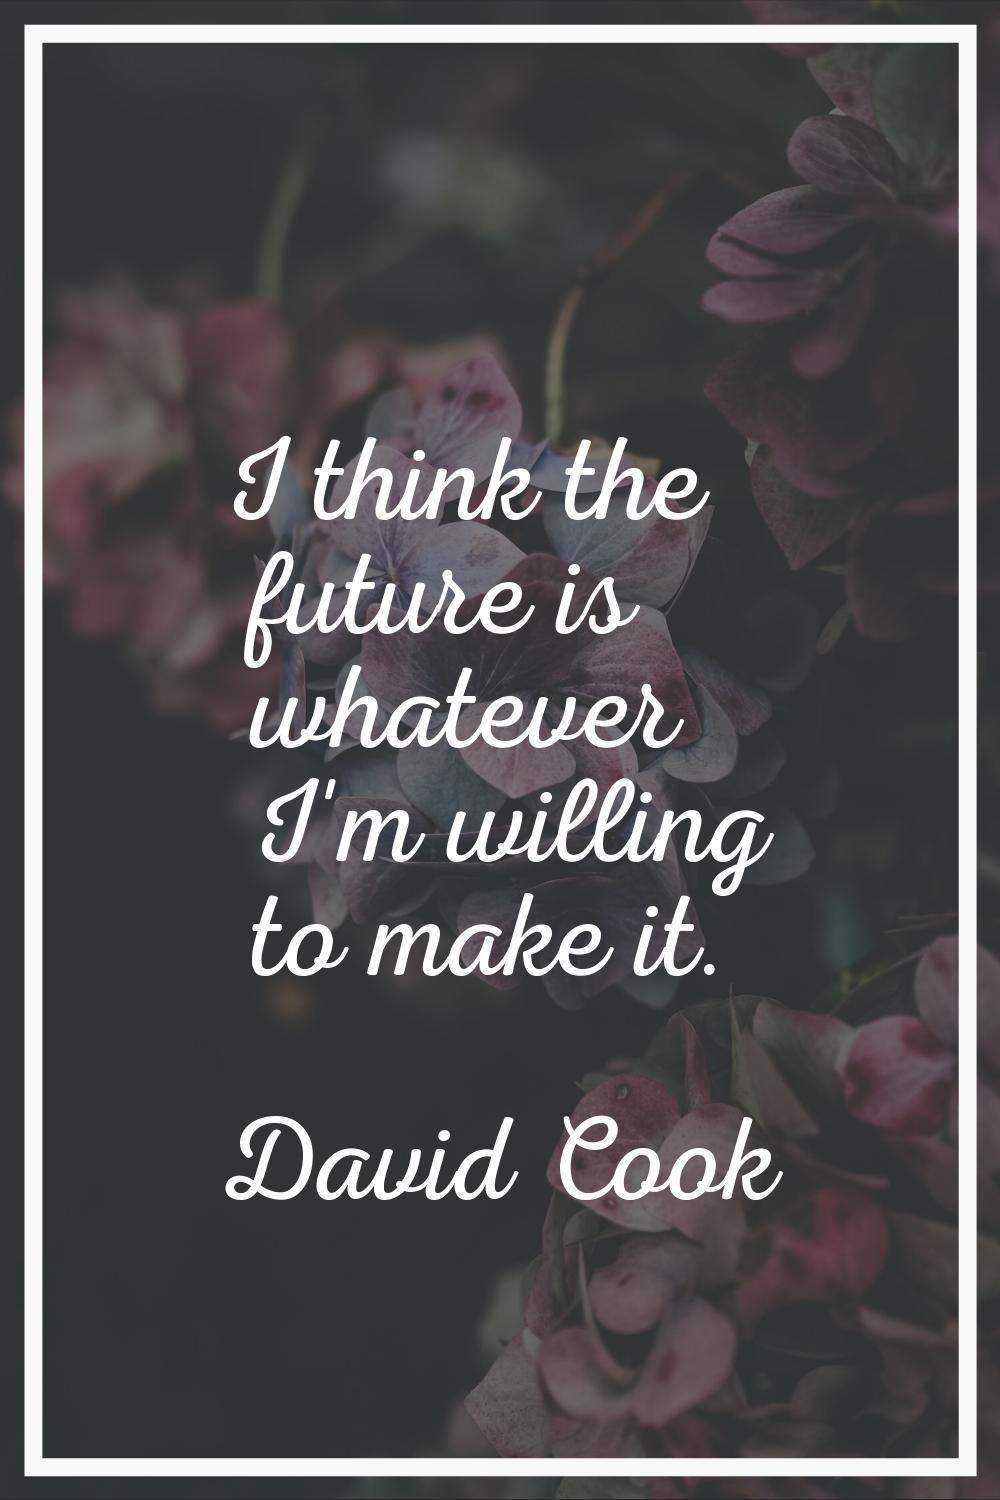 I think the future is whatever I'm willing to make it.